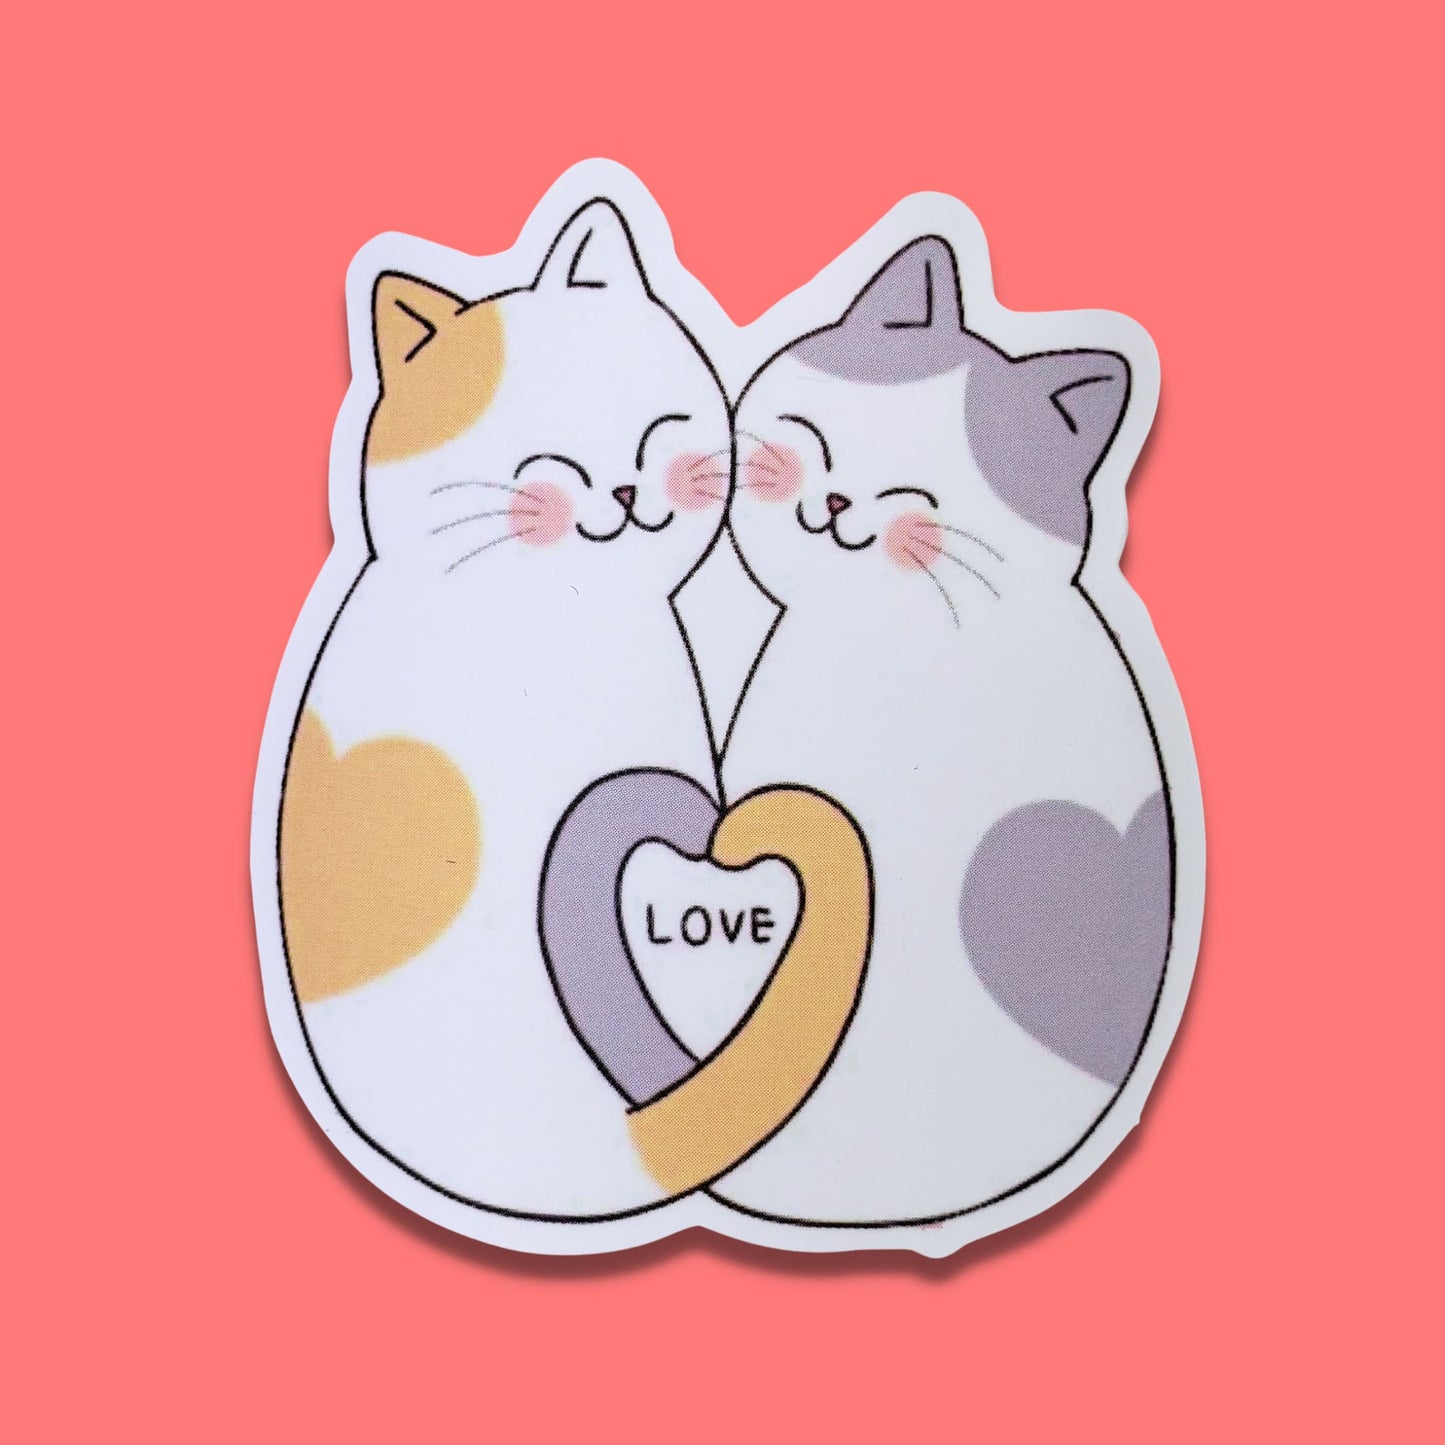 Cats in Love Waterproof Sticker from Confetti Kitty, Only 1.00